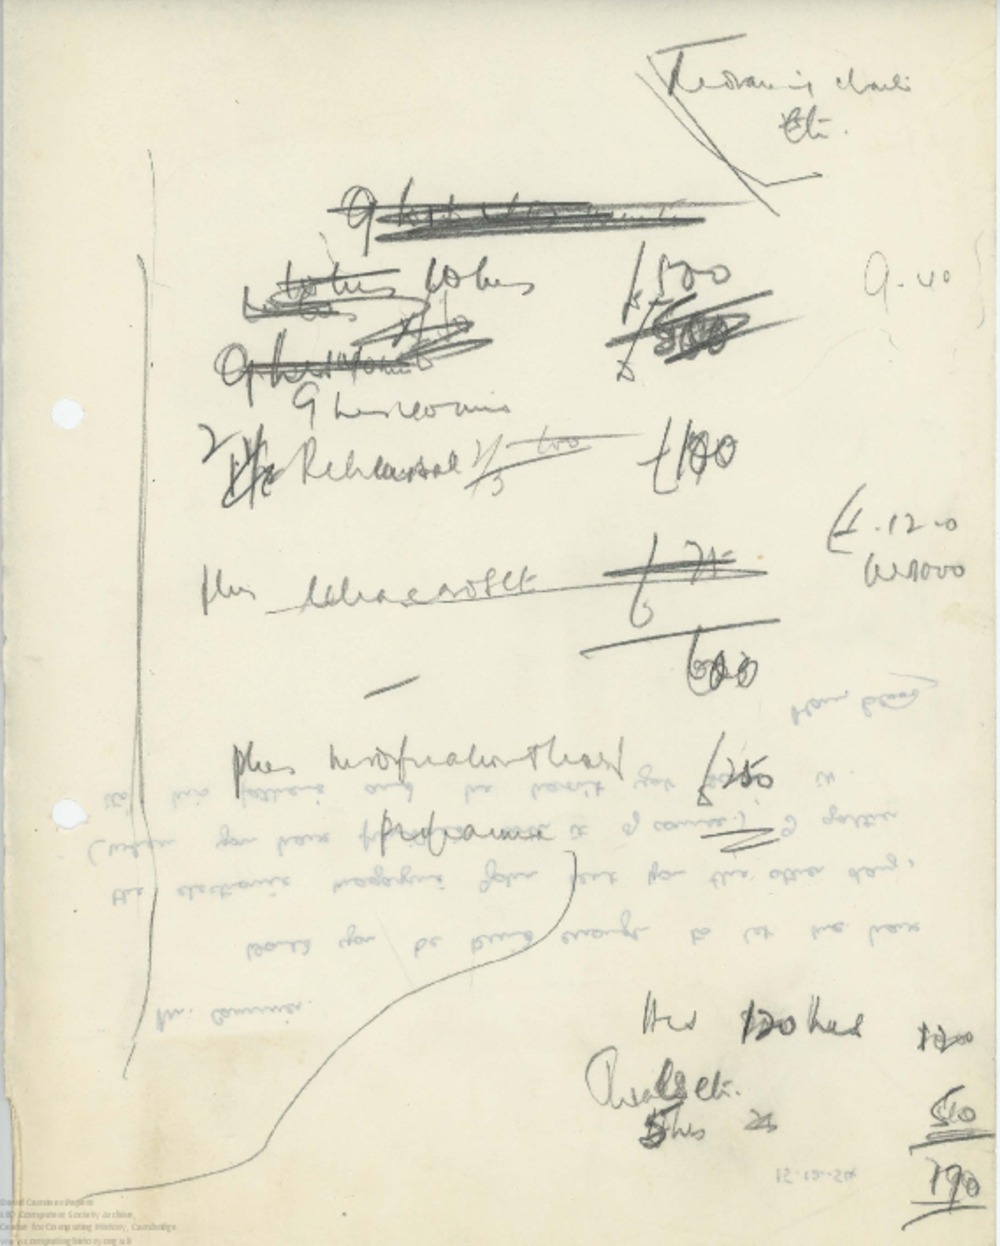 Article: 62934 David Caminer draft with a note from Mary Blood, 15 Dec 1954